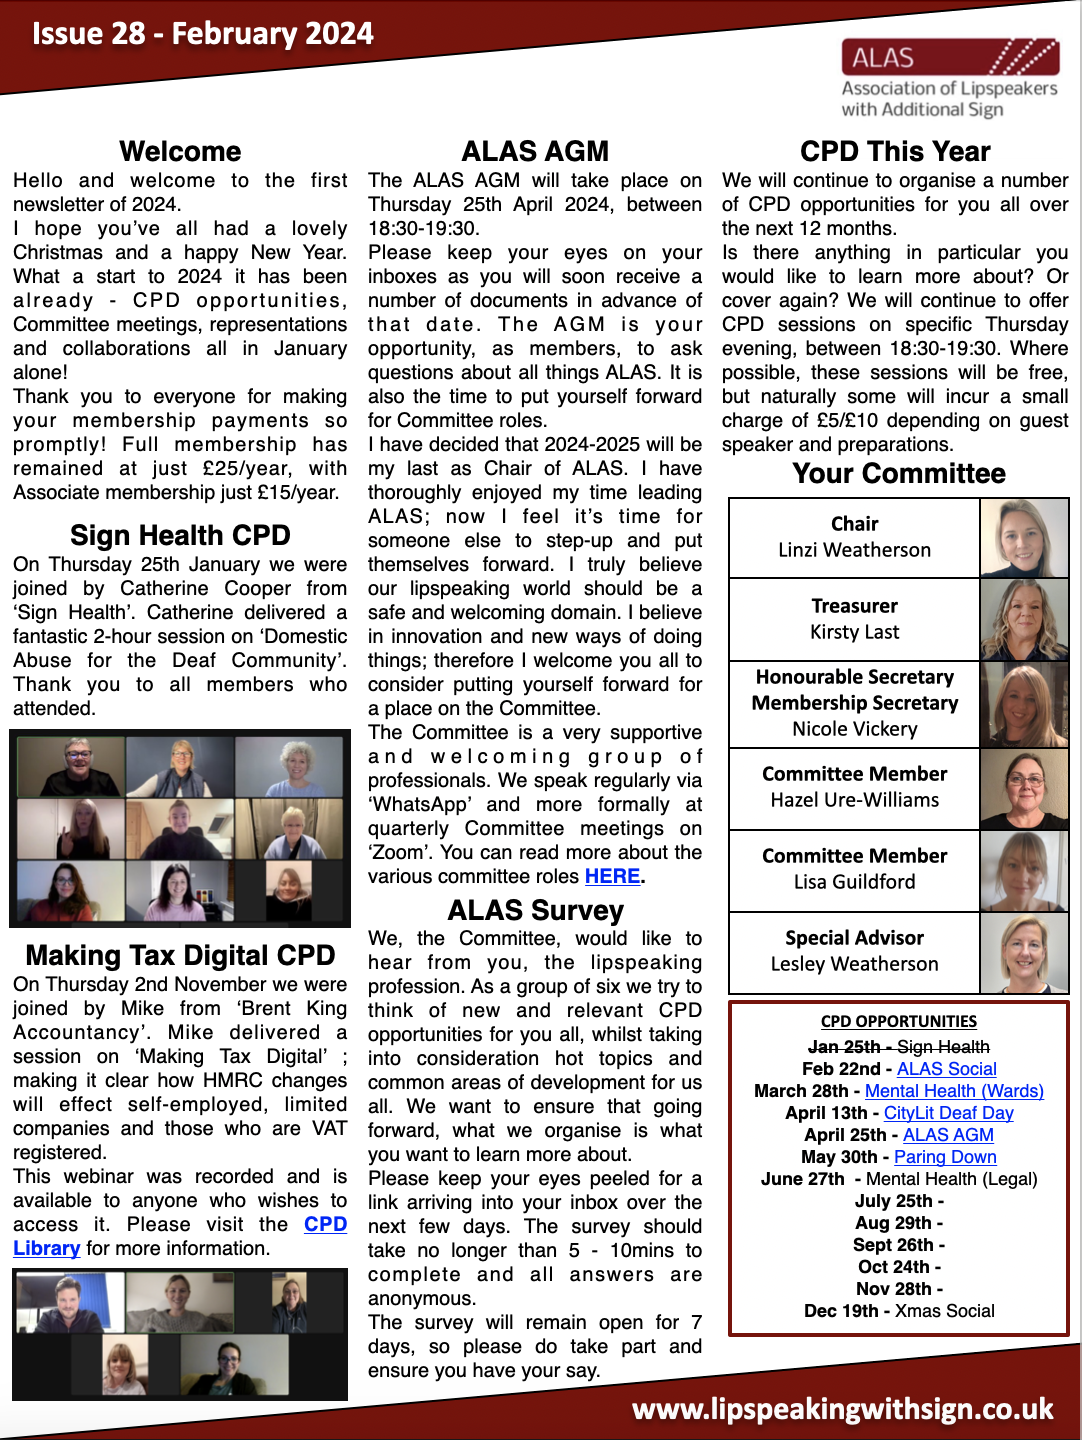 A newsletter covering various topics including Sign Health CPD, Making Tax Digital, ALAS AGM, ALAS Survey and CPD.